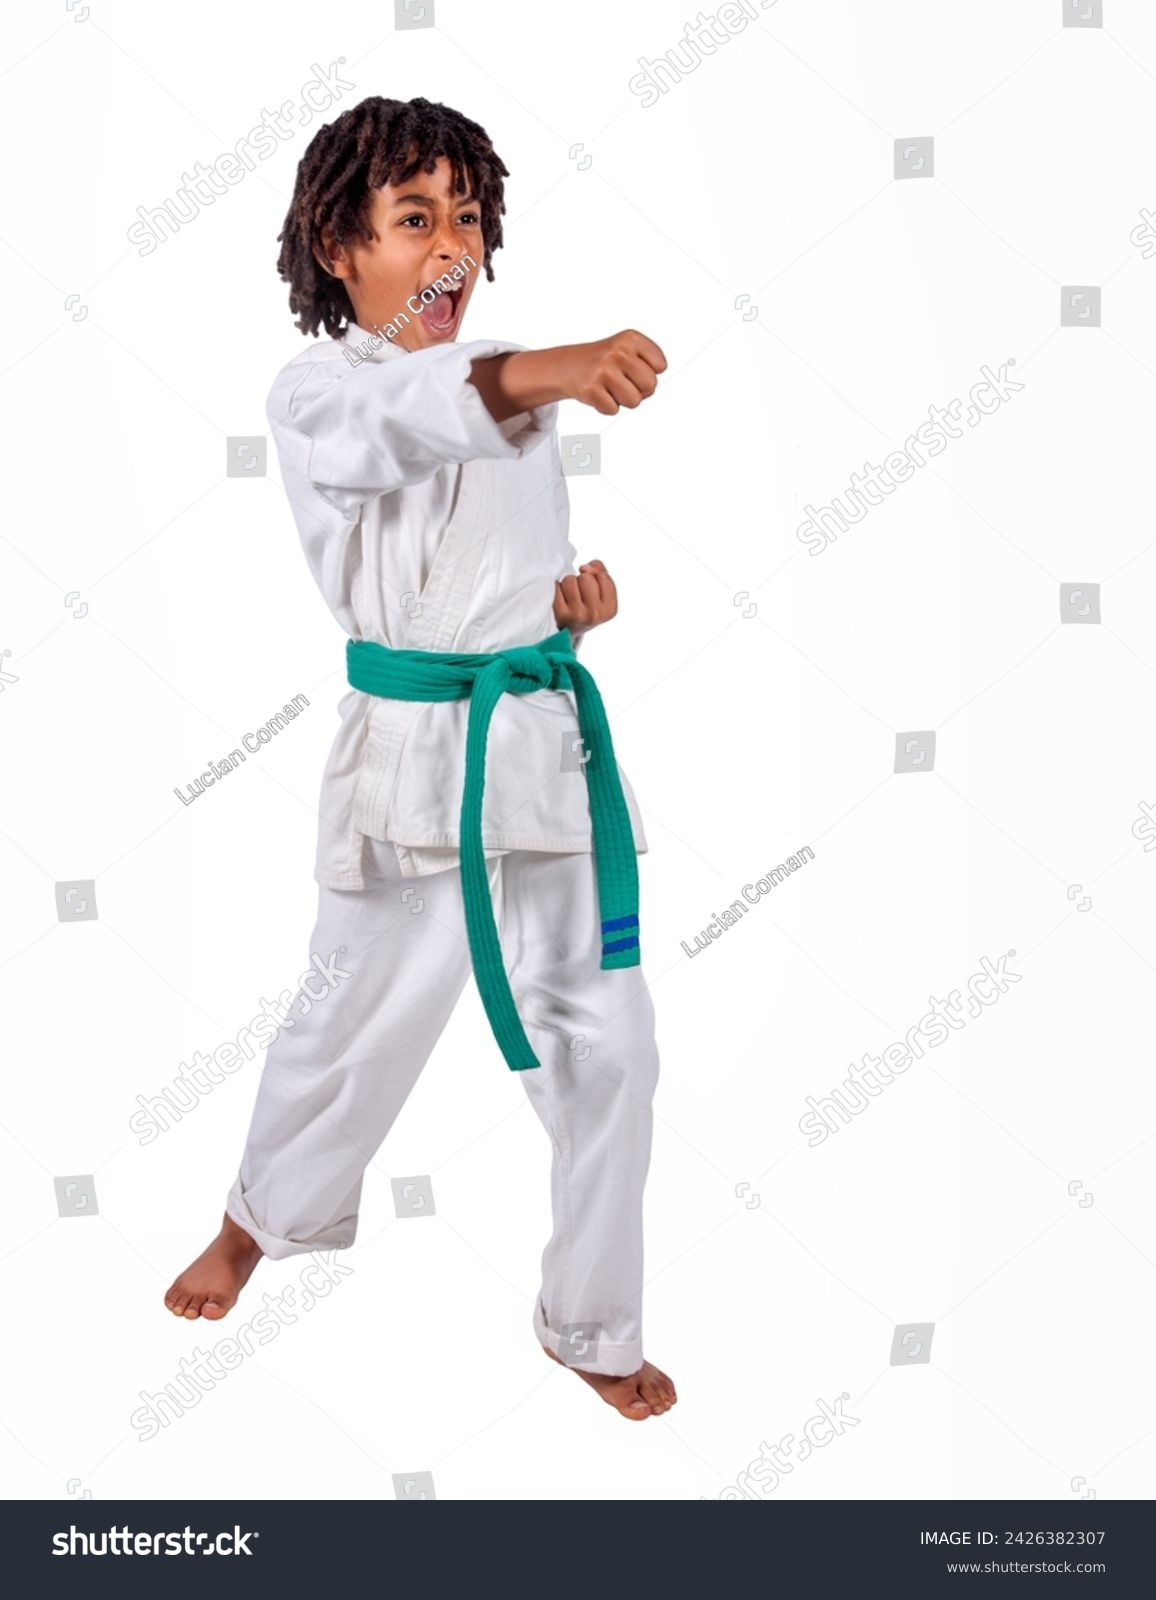 african american boy in karate suit training, uniform karate gi , keikogi or dogi, suit is white, hairstyle with braids, dreadlocks, isolated on white background #2426382307